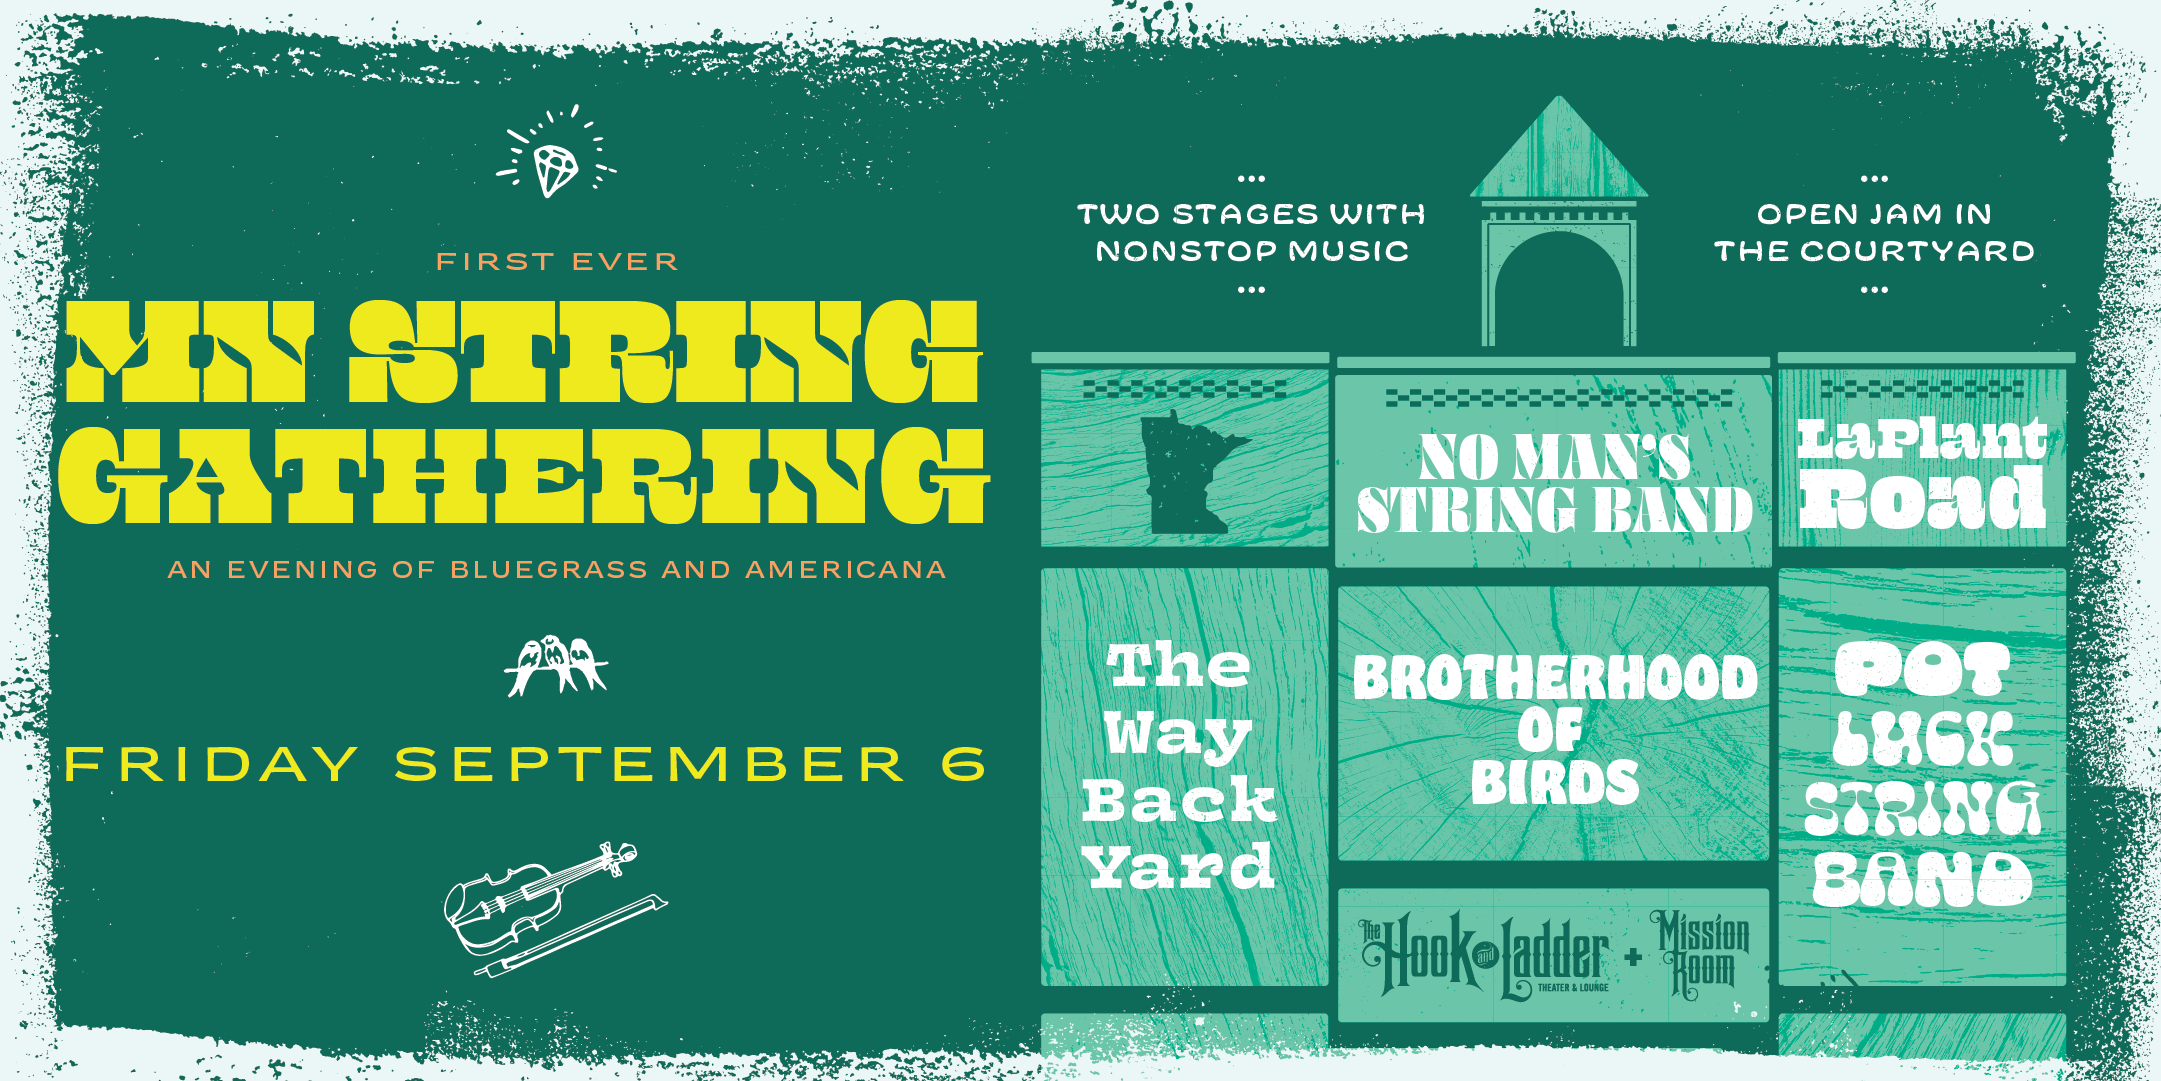 MN STRING GATHERING An Evening of Bluegrass & Americana Featuring: Brotherhood of Birds, Pot Luck String Band, The Way Back Yard, LaPlant Road, No Man's String Band Friday, September 6 The Hook & Ladder Theater / Mission Room / Zen Arcade Doors 6:00pm :: Music 7:00pm :: 21+ GA: $17 ADV / $23 DOS